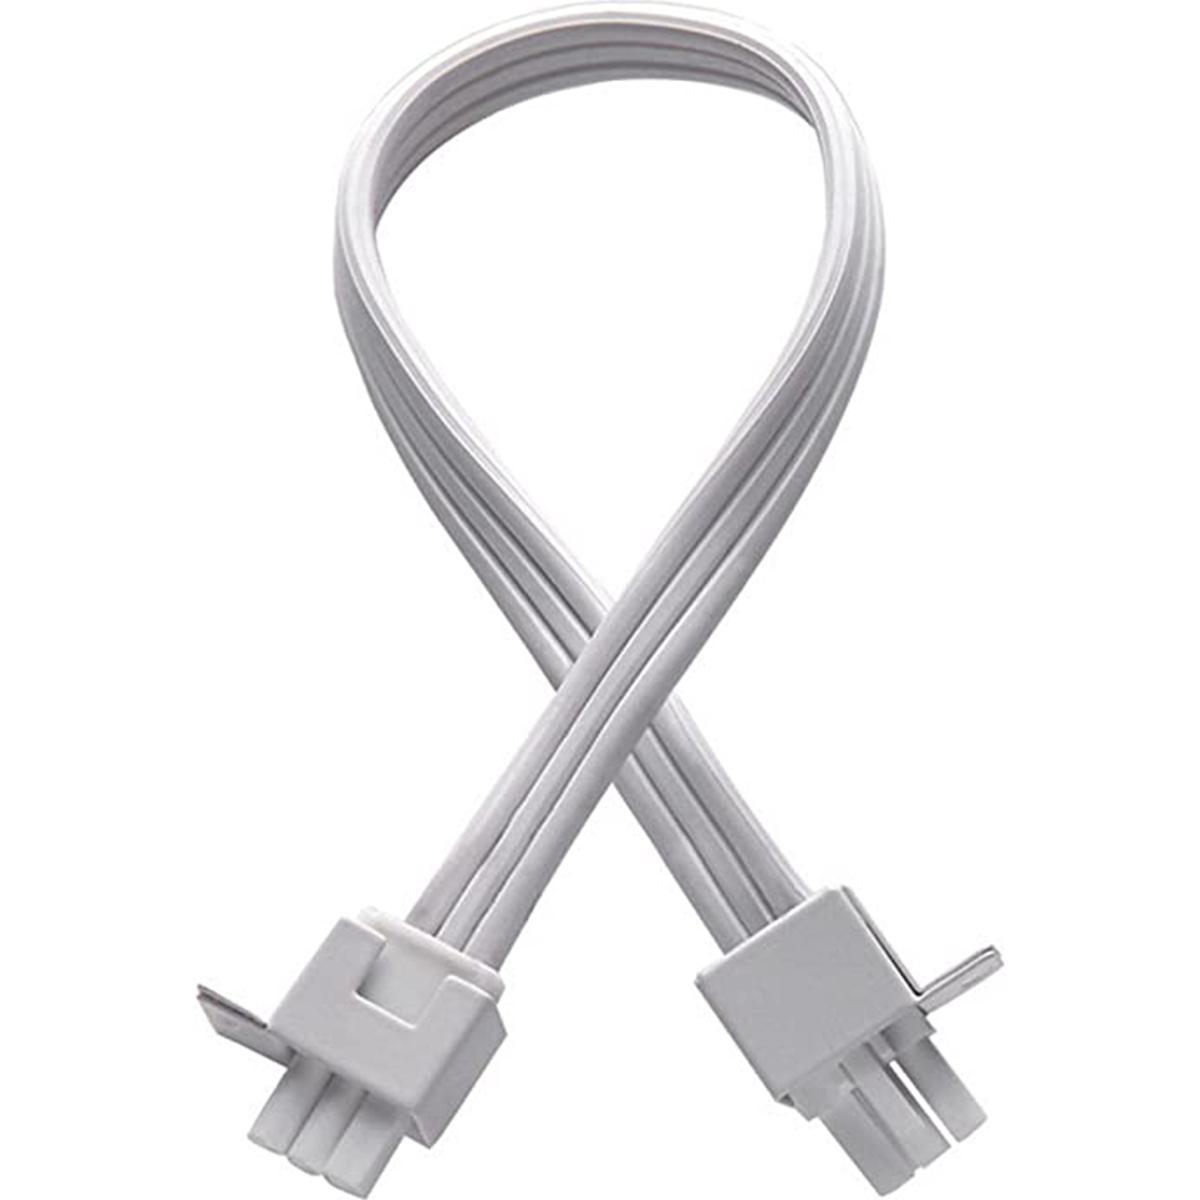 24in. Interconnect Cable For Undercabinet Lights, White Finish - Bees Lighting